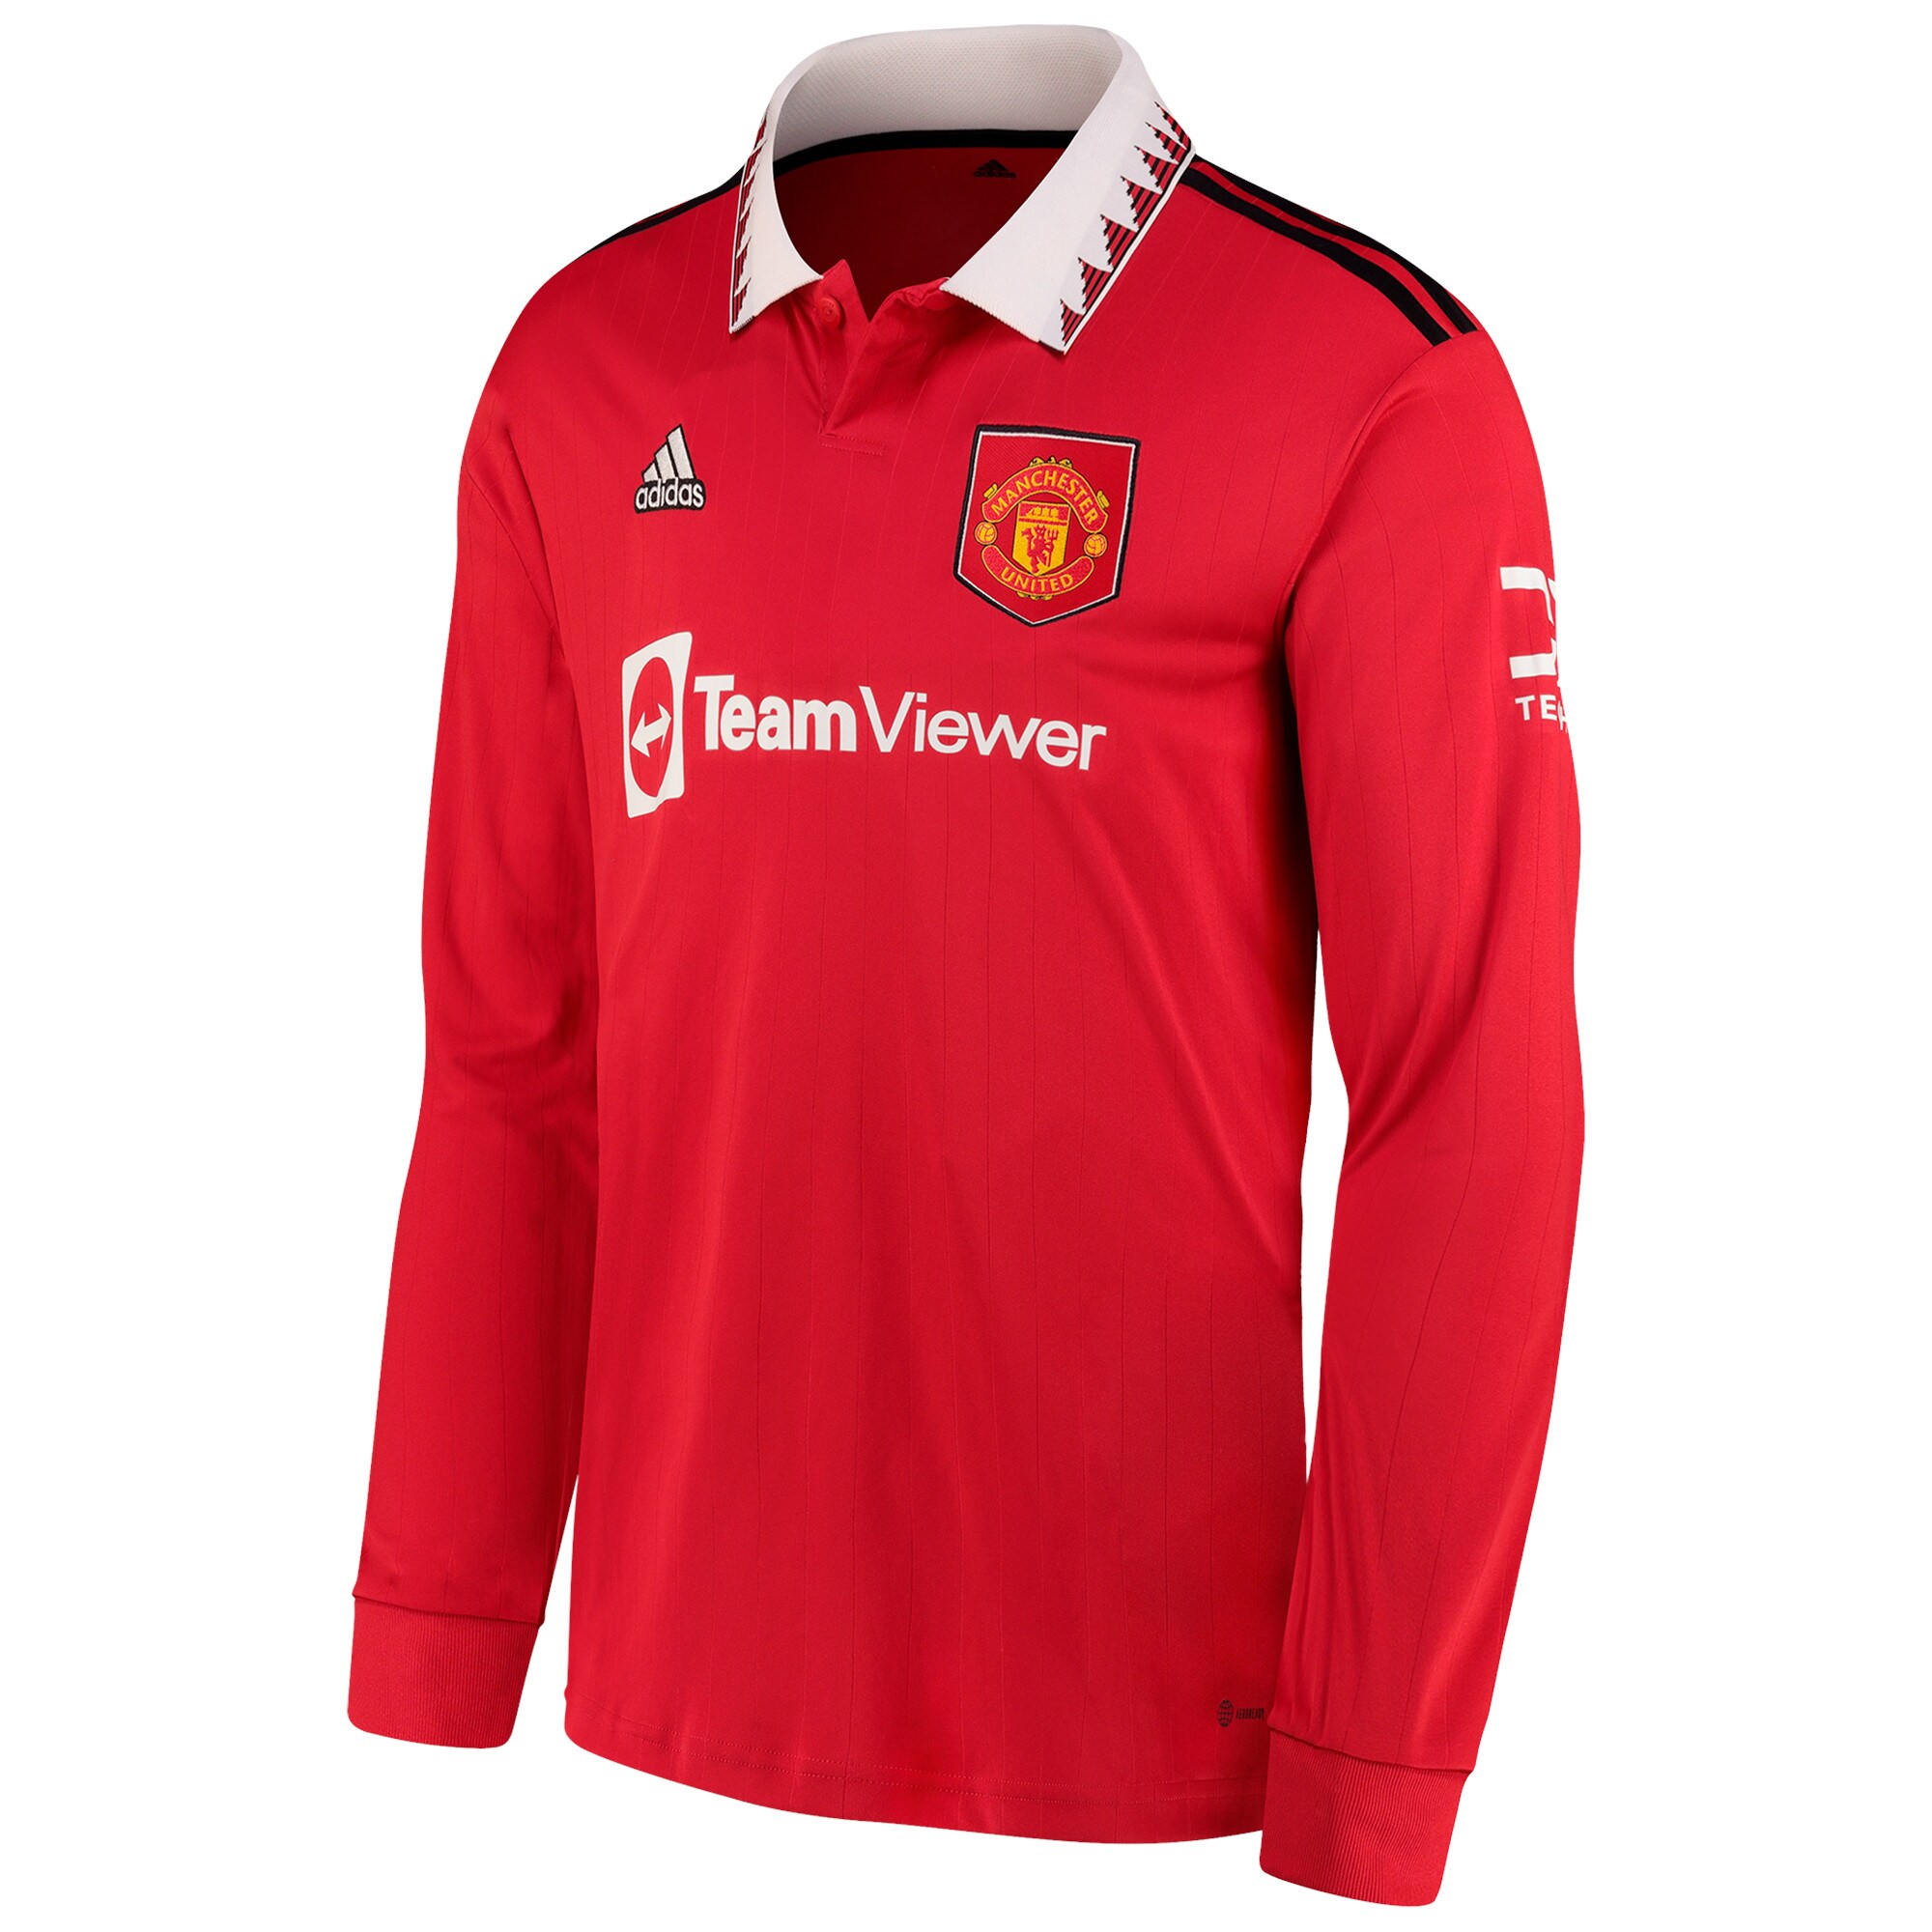 Manchester United Home Shirt 2022-2023 with Maguire 5 printing